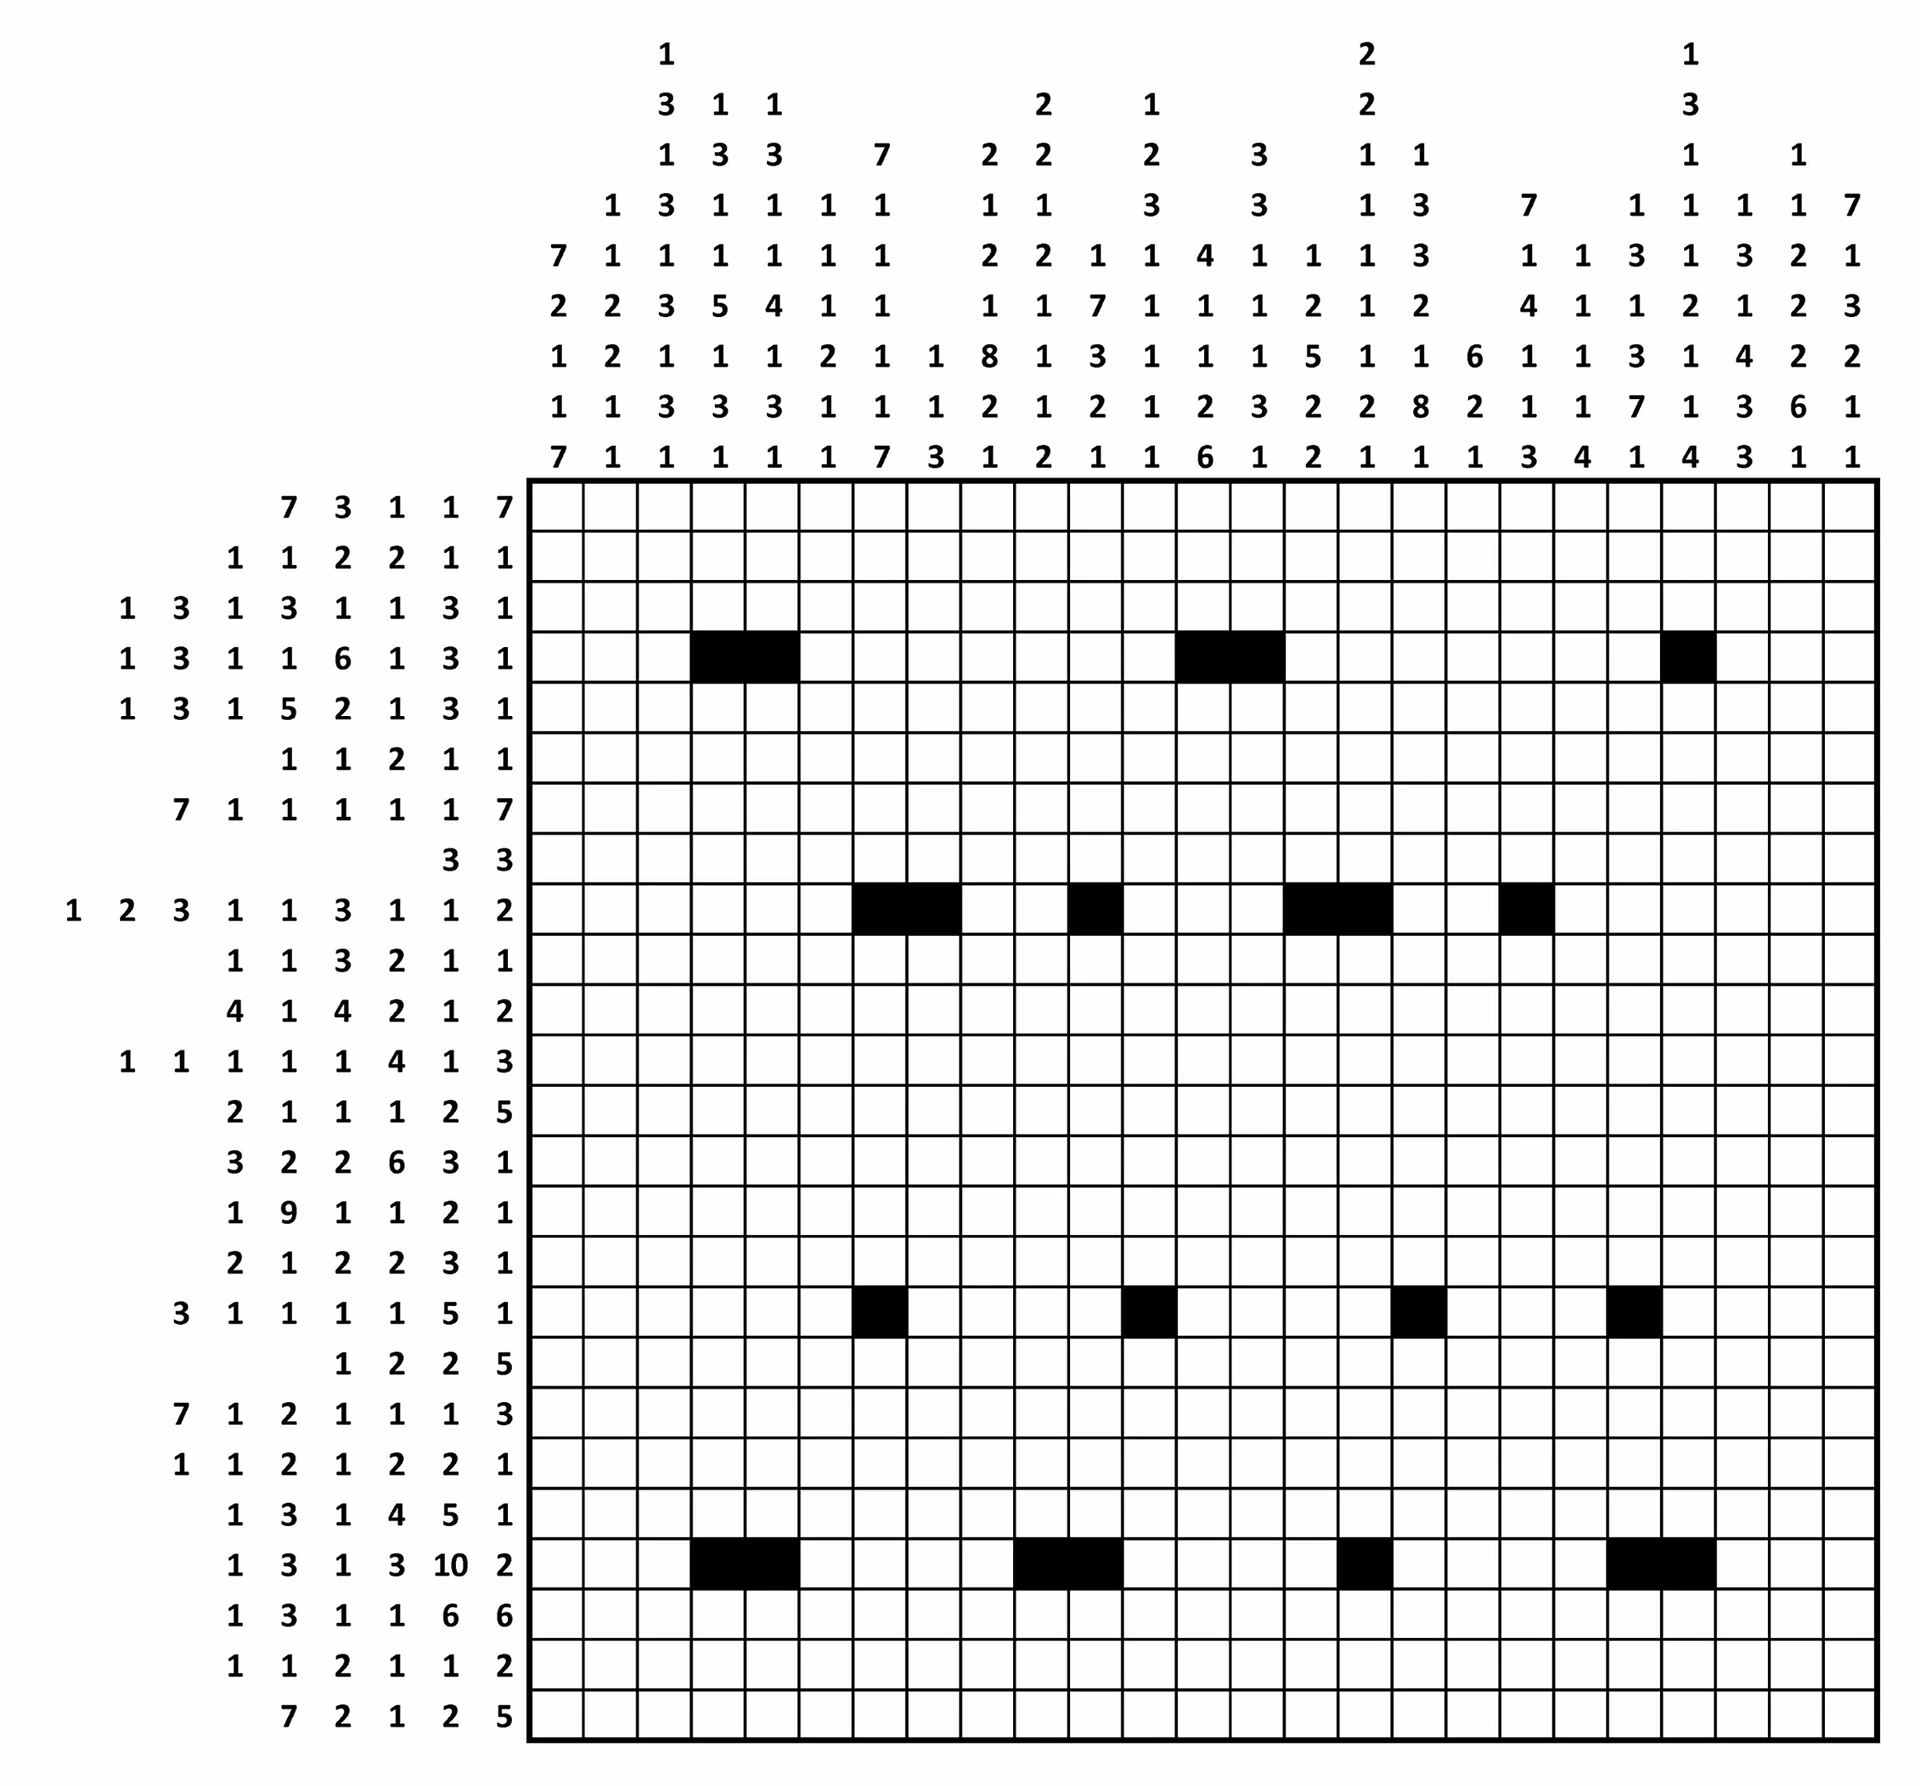 Can You Solve This UK Intelligence Agency Christmas Puzzle?